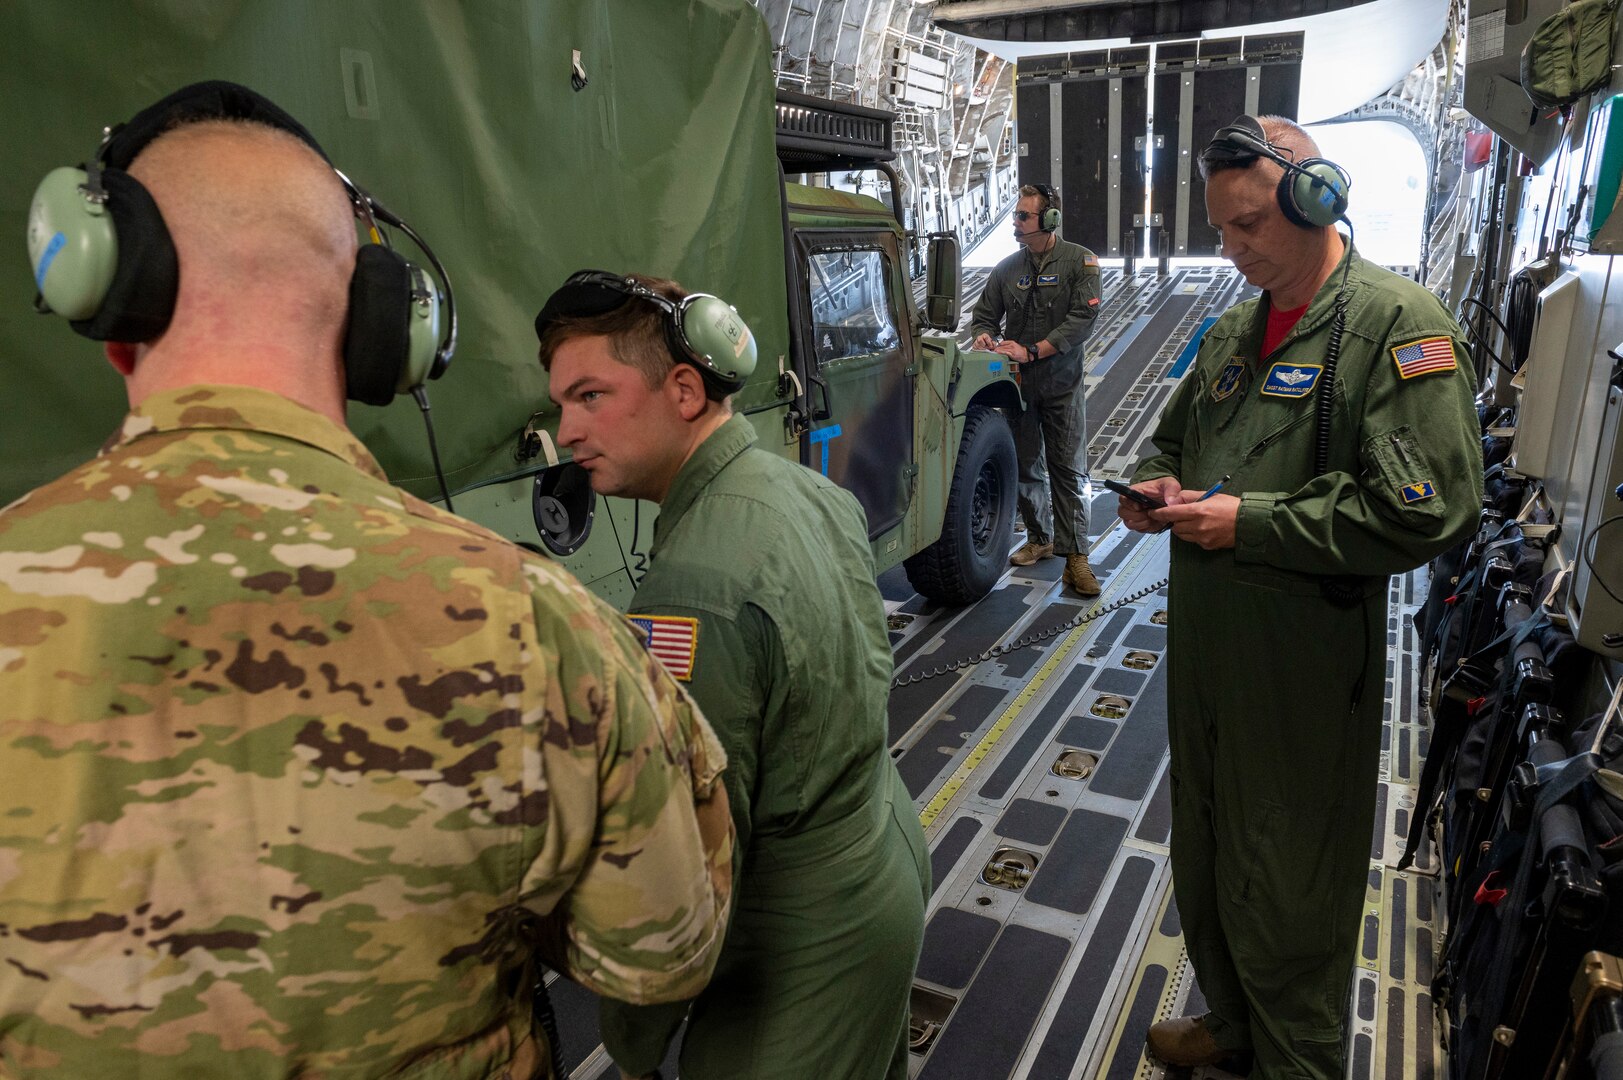 U.S. Air Force Senior Master Sgt. Daniel Ratcliffe, 167th Airlift Squadron loadmaster, right, evaluates loadmasters on their vehicle loading efforts during the 167th Operations Group rodeo event, at Shepherd Field, Martinsburg, West Virginia, Nov. 5, 2022. The rodeo was held to evaluate aircrew skills as part of a fun, friendly competition within the operations group.